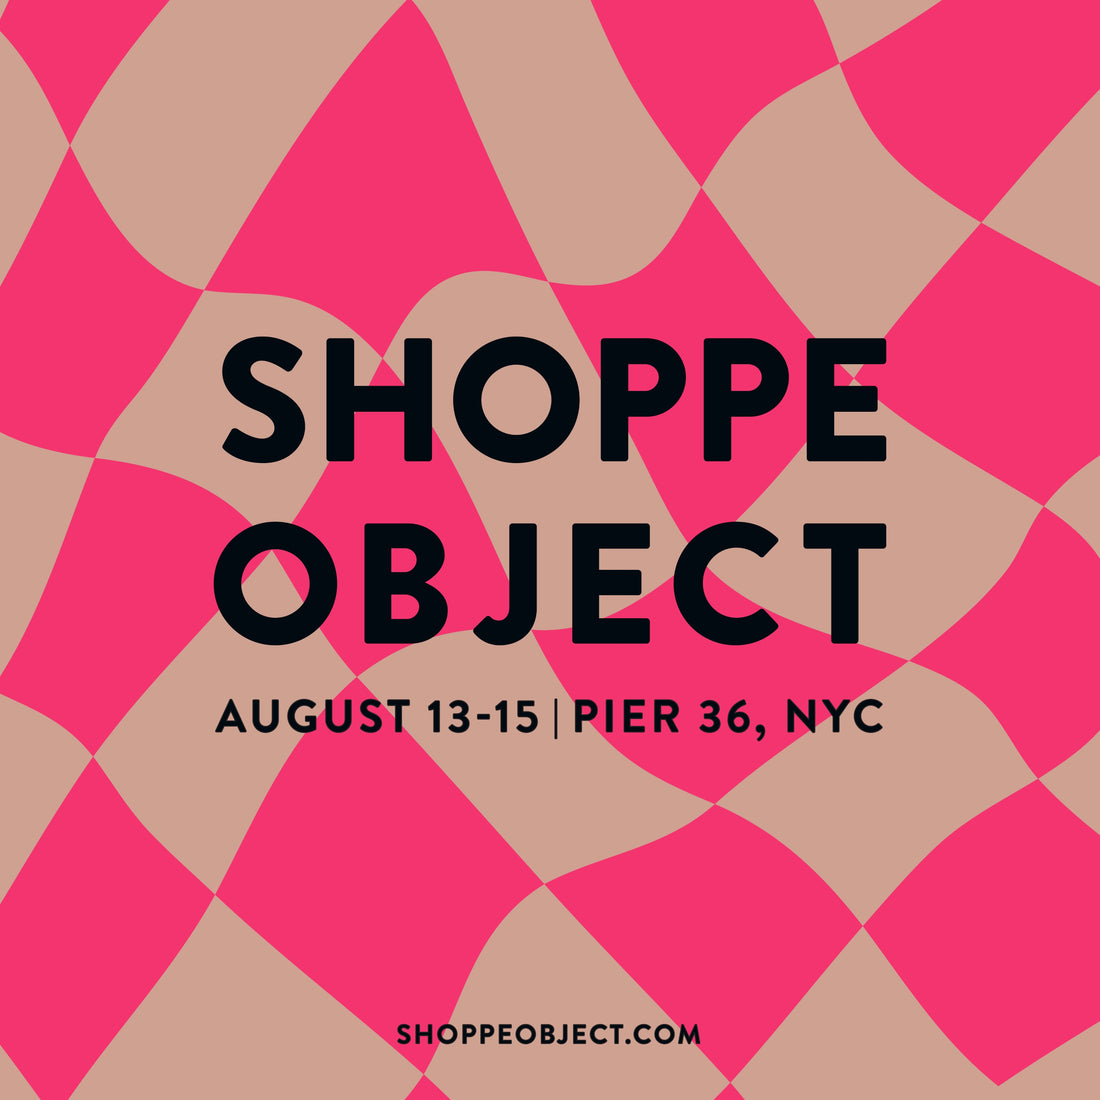 Shoppe Object August 13-15 Pier 36, NYC